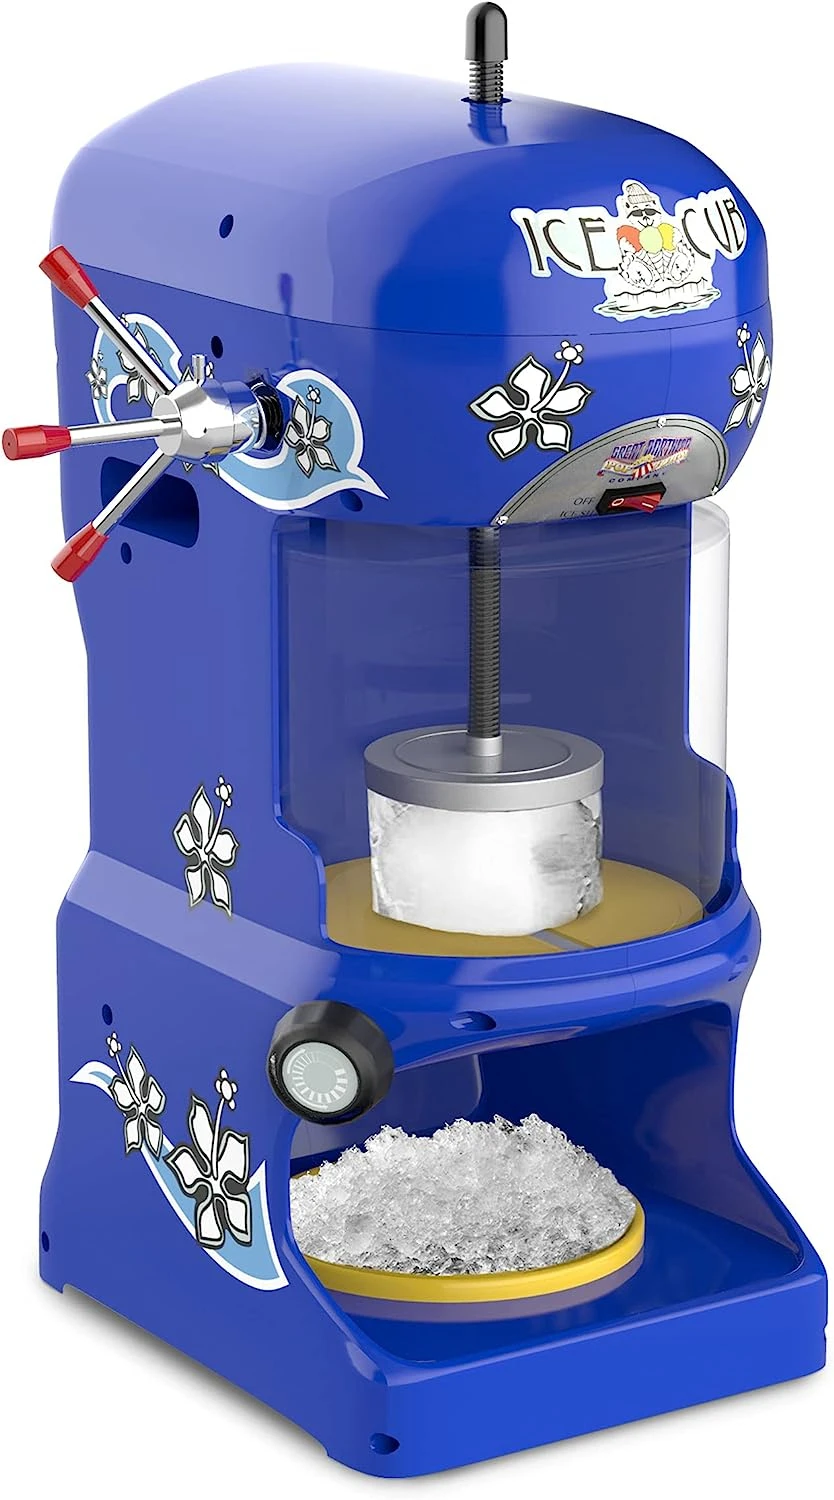 

Northern Premium Quality Ice Cub Shaved Ice Machine Commercial Ice Shaver